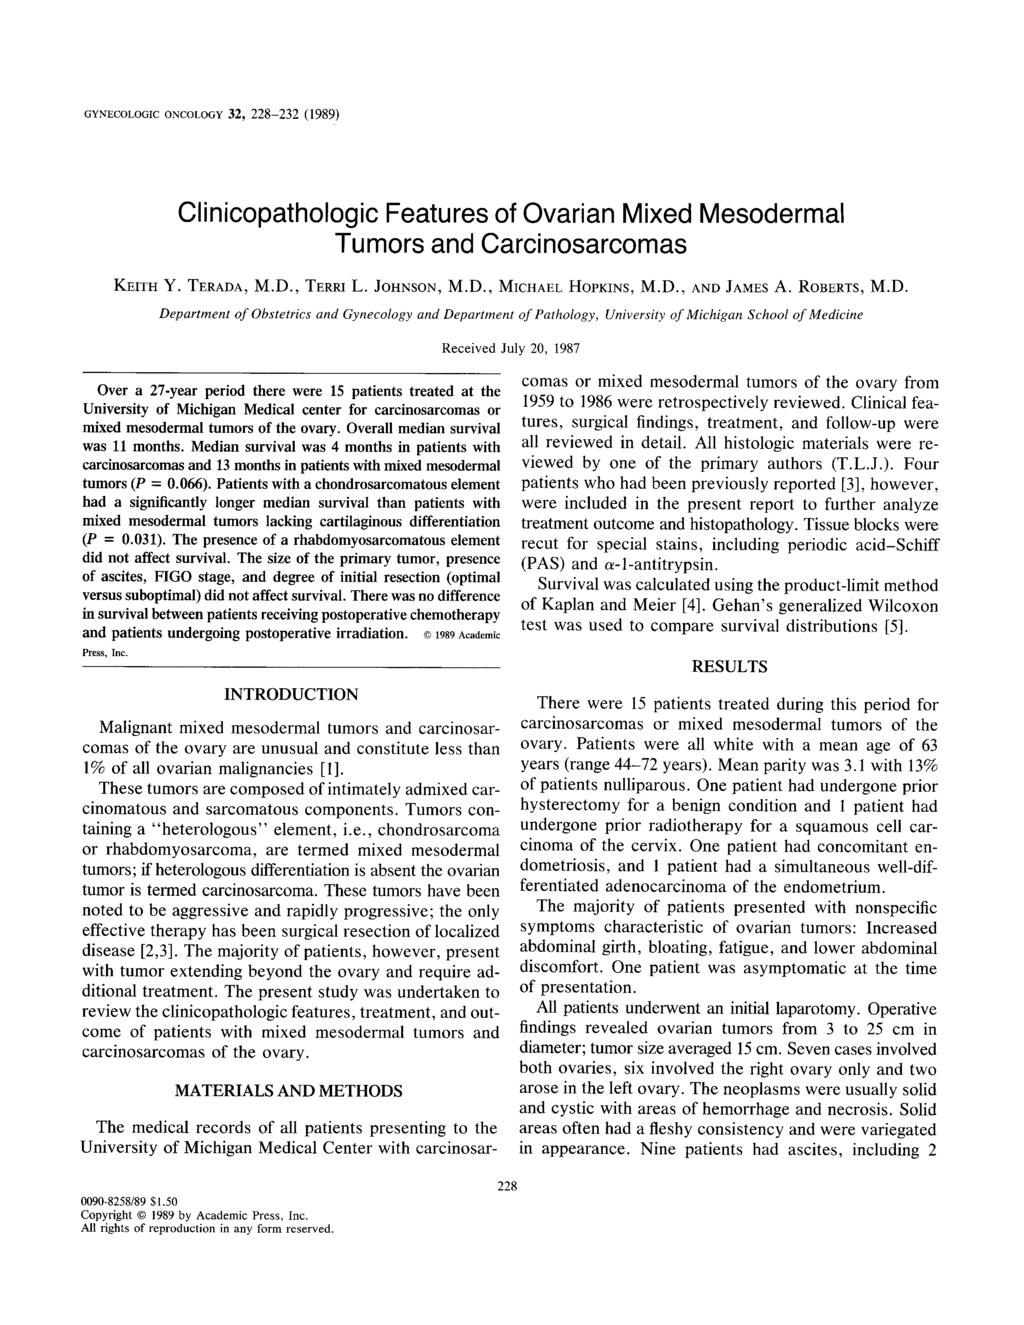 GYNECOLOGIC ONCOLOGY 2, 228--22 (989) Clinicopathologic Features of Ovarian Mixed Mesodermal Tumors and Carcinosarcomas KEITH Y. TERADA, M.D., TERRI L. JOHNSON, M.D., MICHAEL HOPKINS, M.D., AND JAMES A.